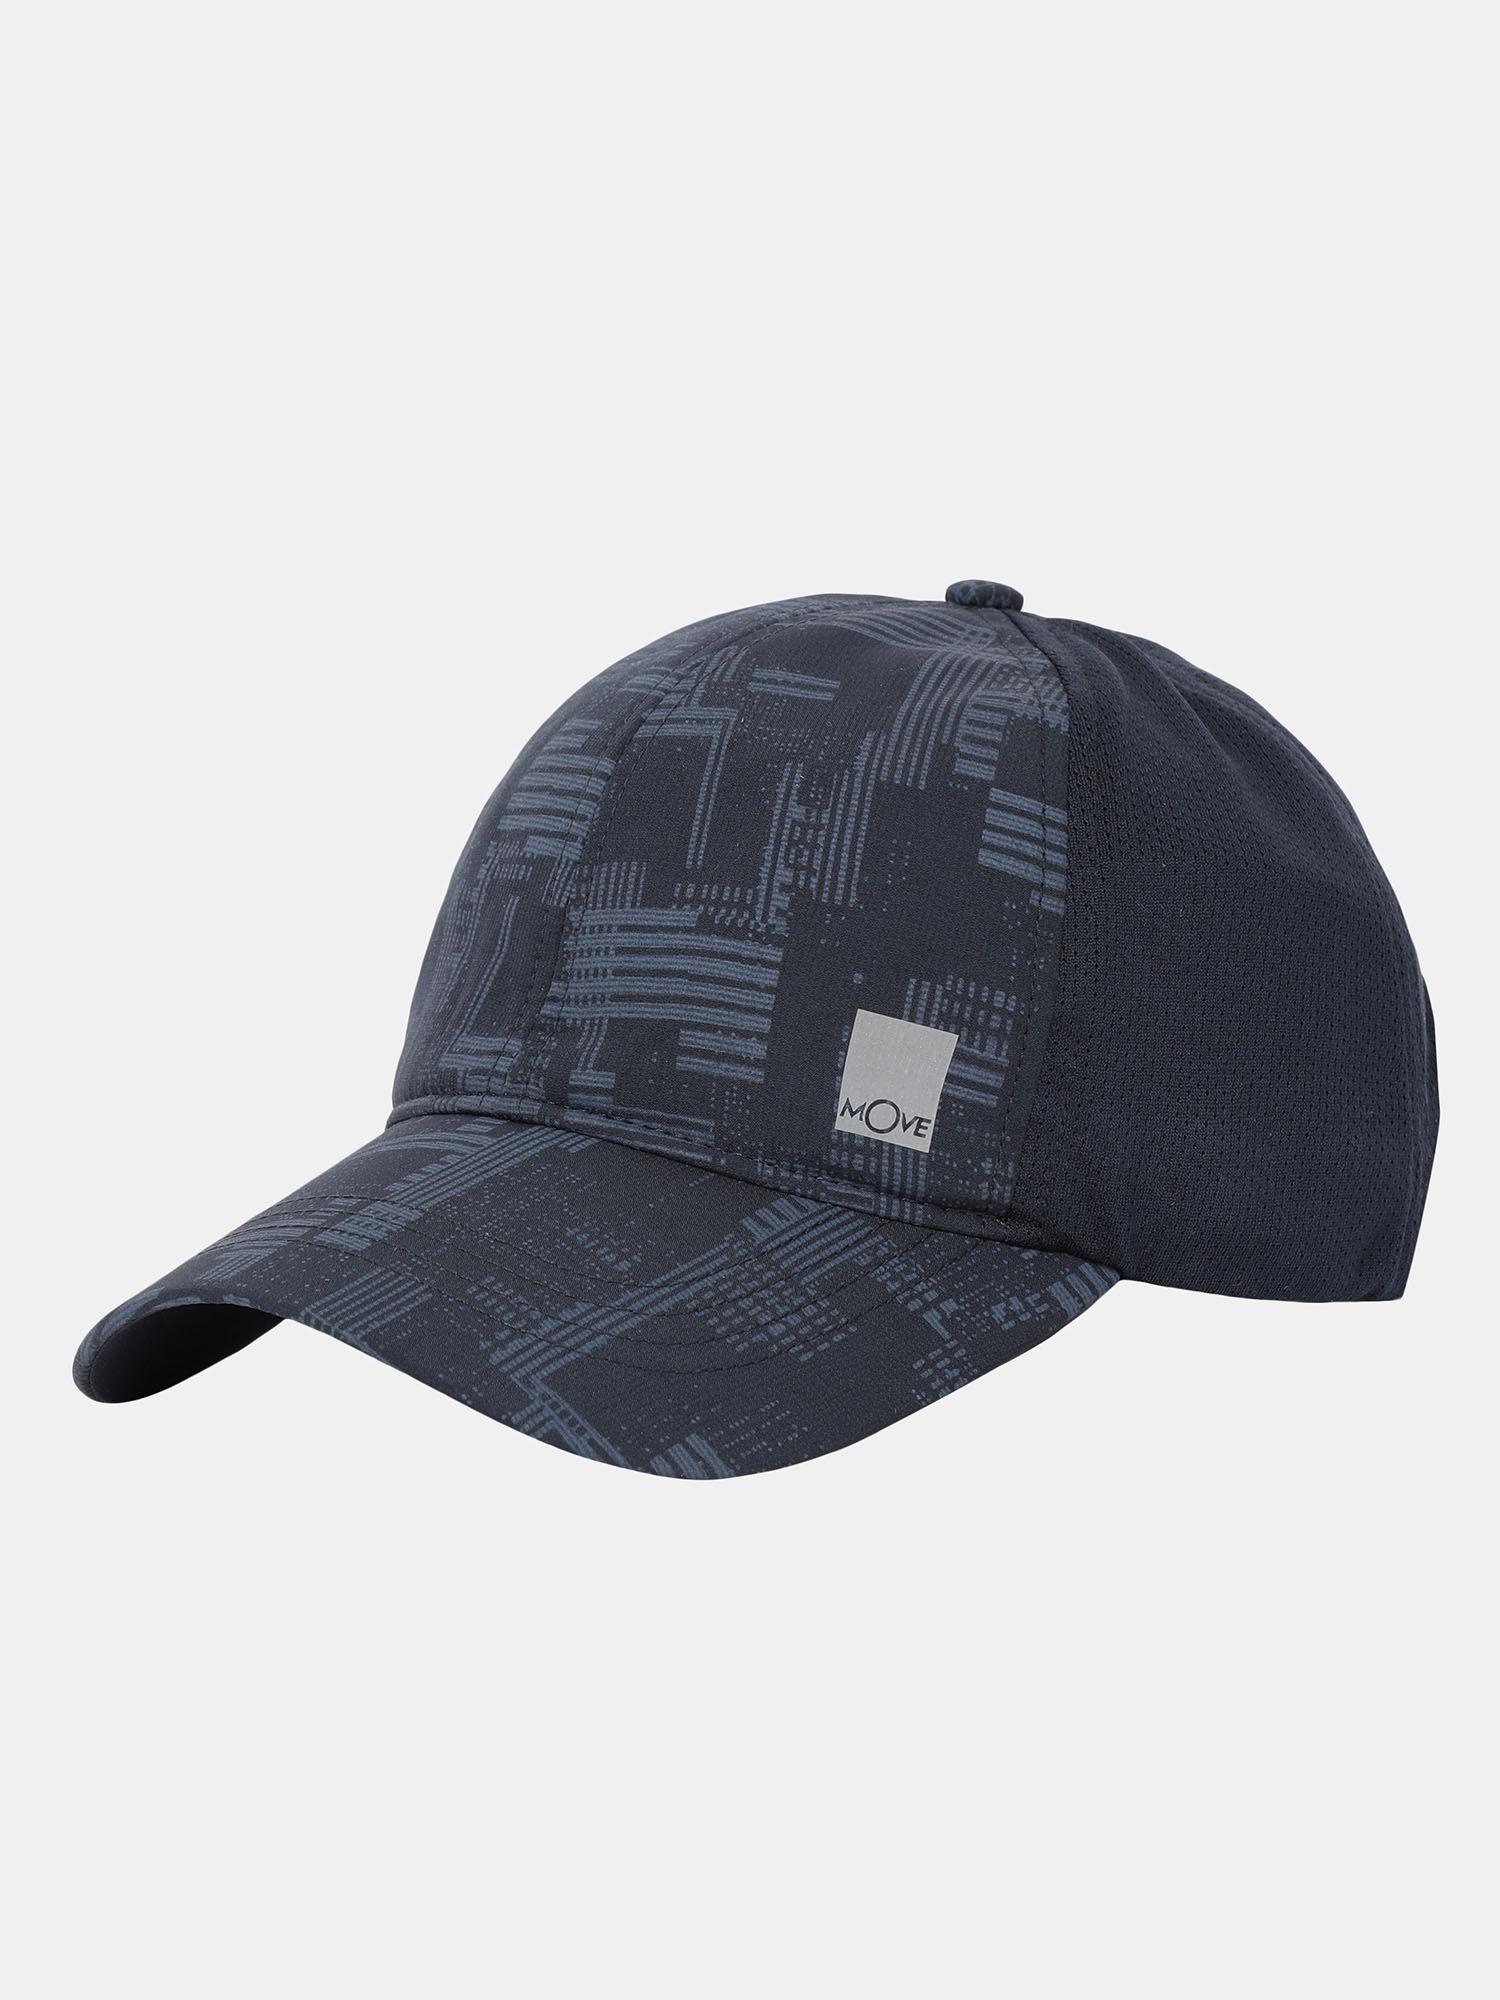 cp23 polyester printed cap with adjustable back closure and stay dry navy